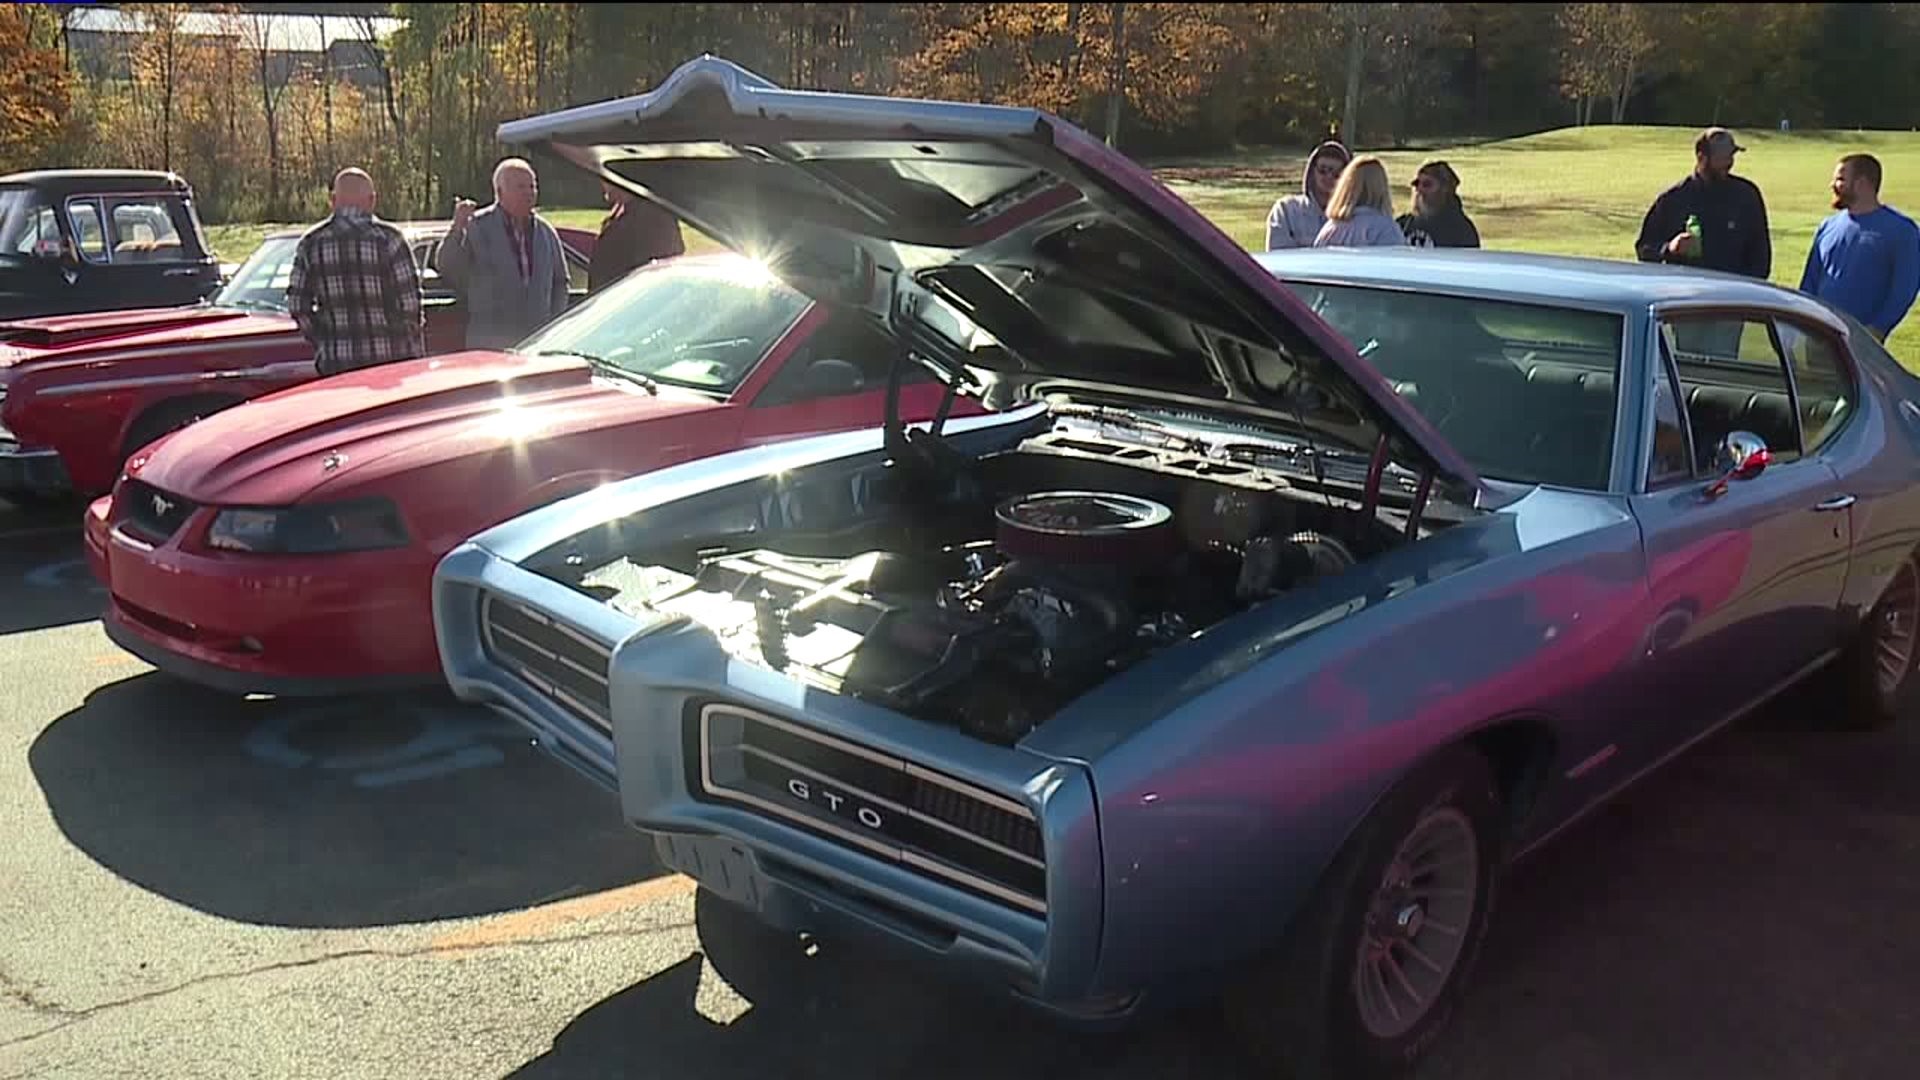 Car Show Held in Memory of Man Who Died from Cancer